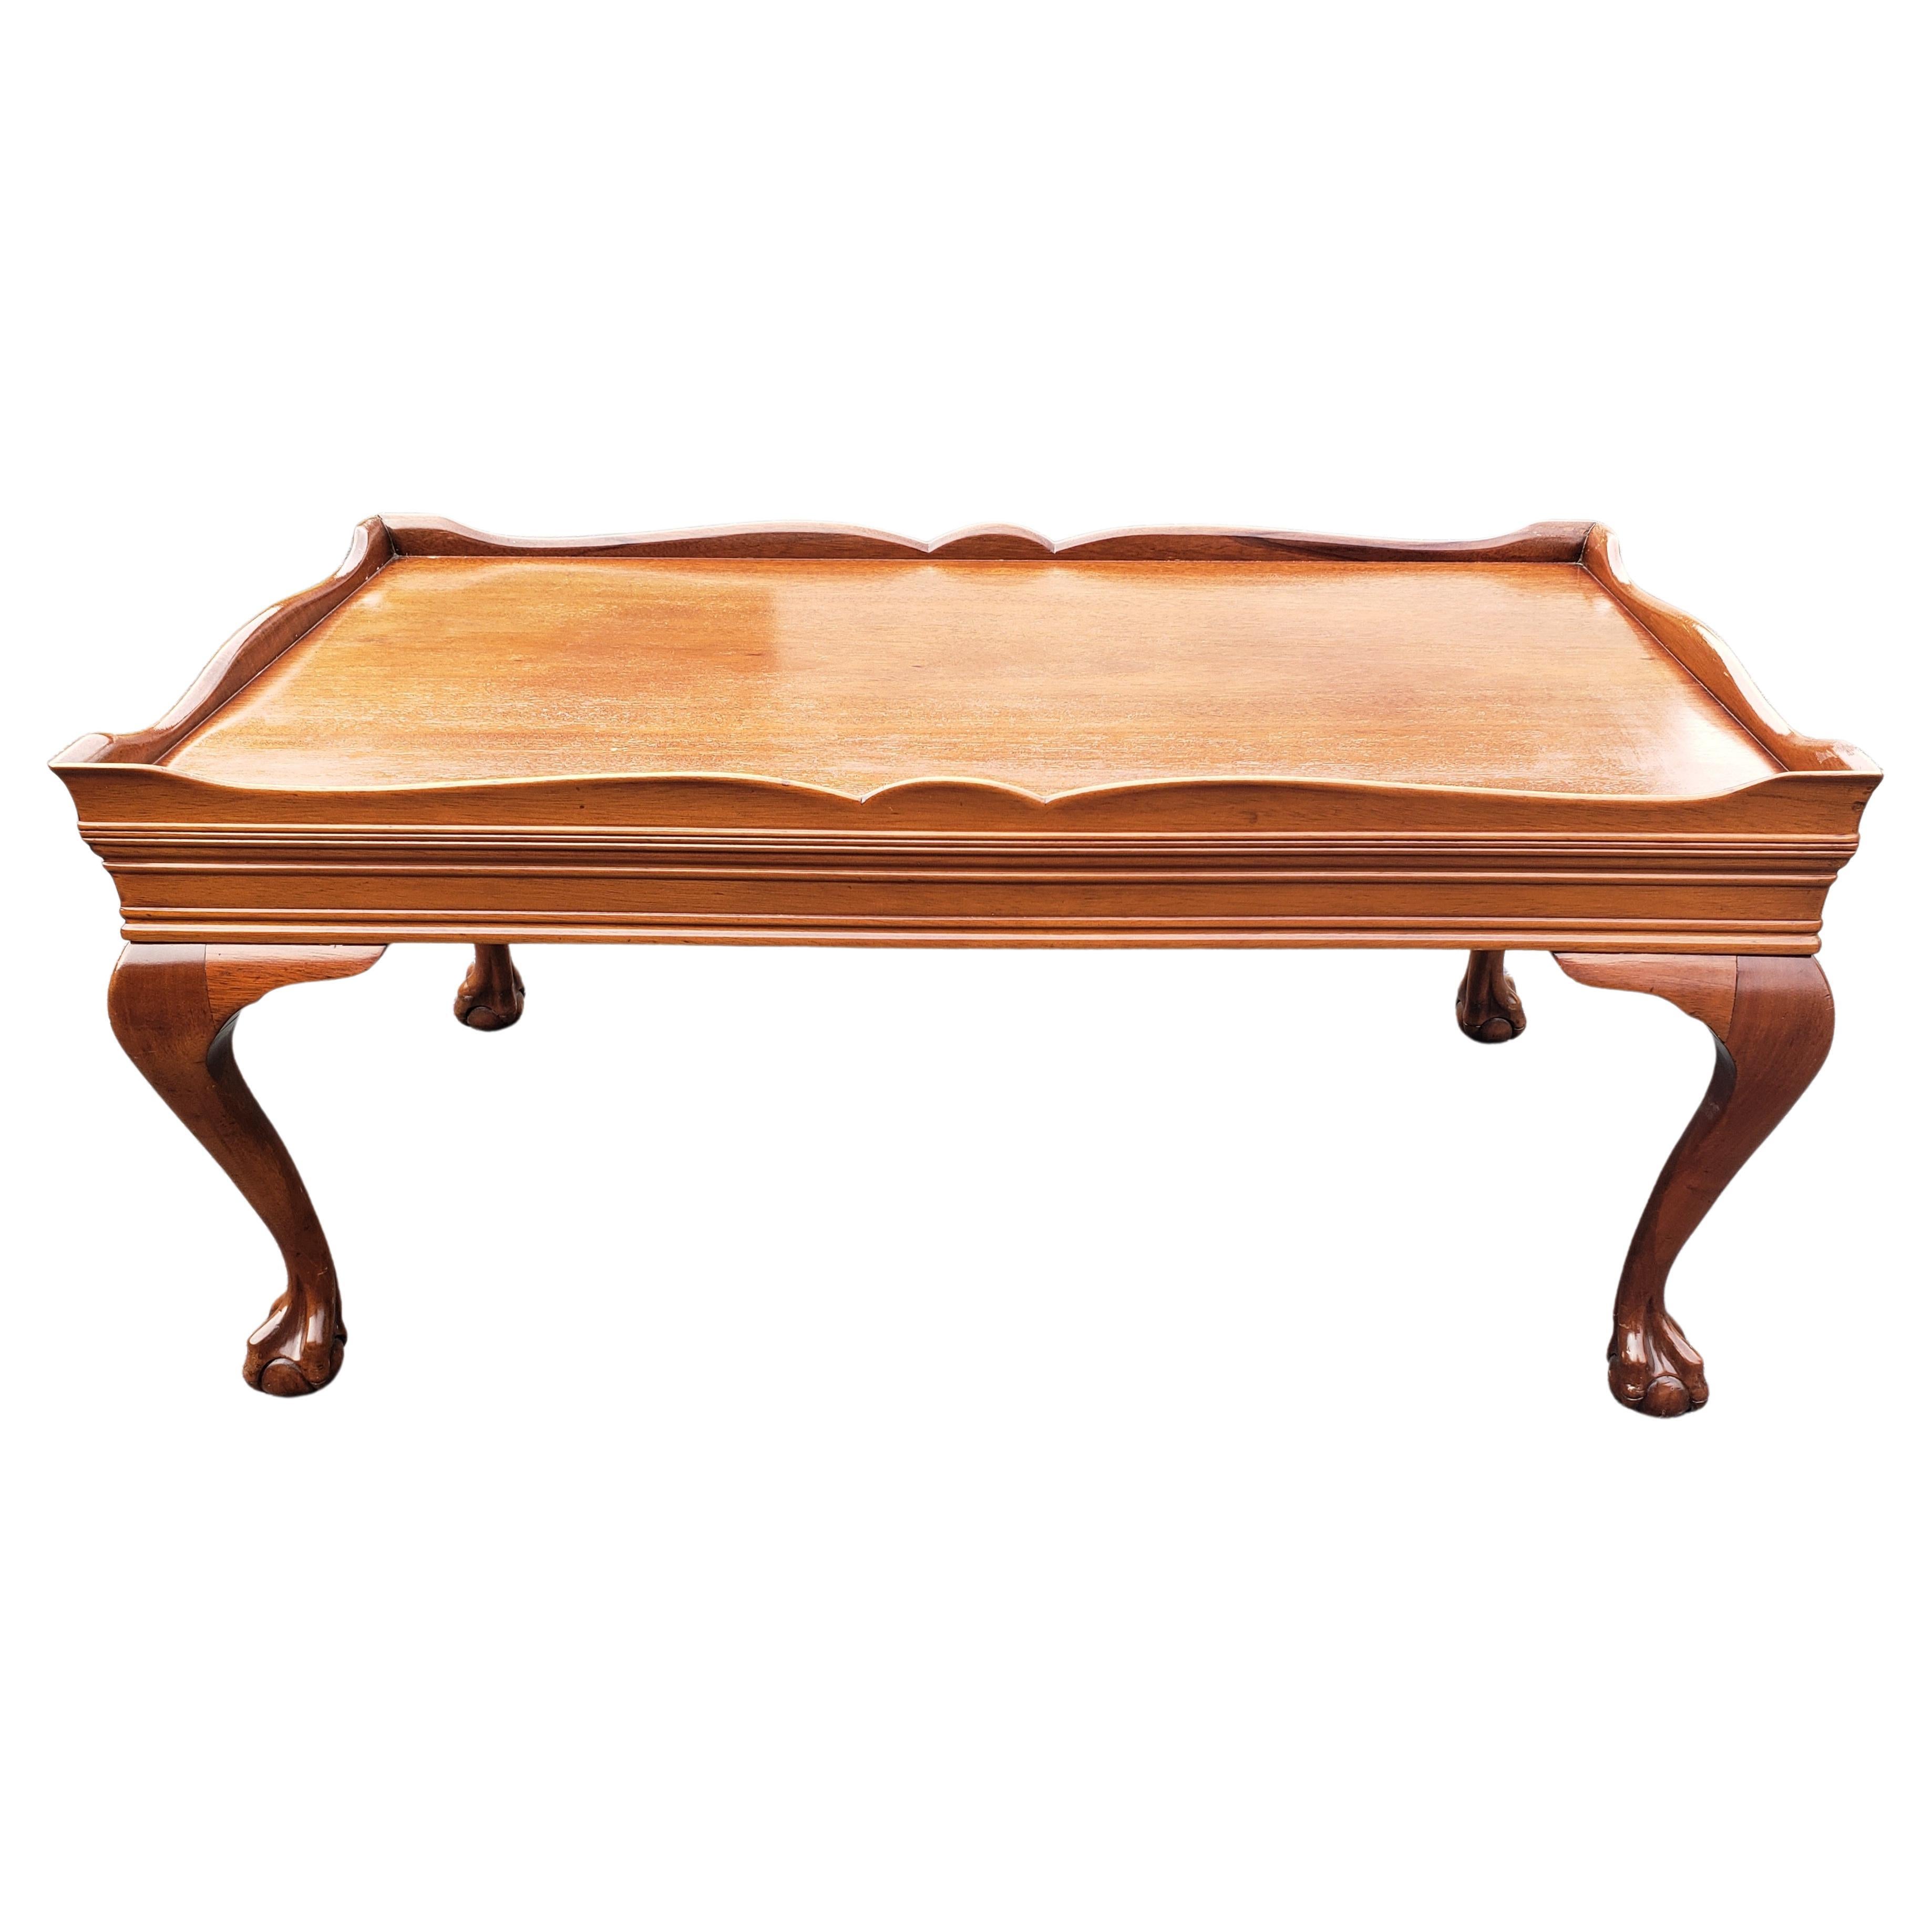 This vintage Chippendale table is designed to add a sense of elegance and refinement to your living room or den. This Chippendale table is handcrafted to the old-world construction techniques. It is build with fine mahogany, which was preferred by